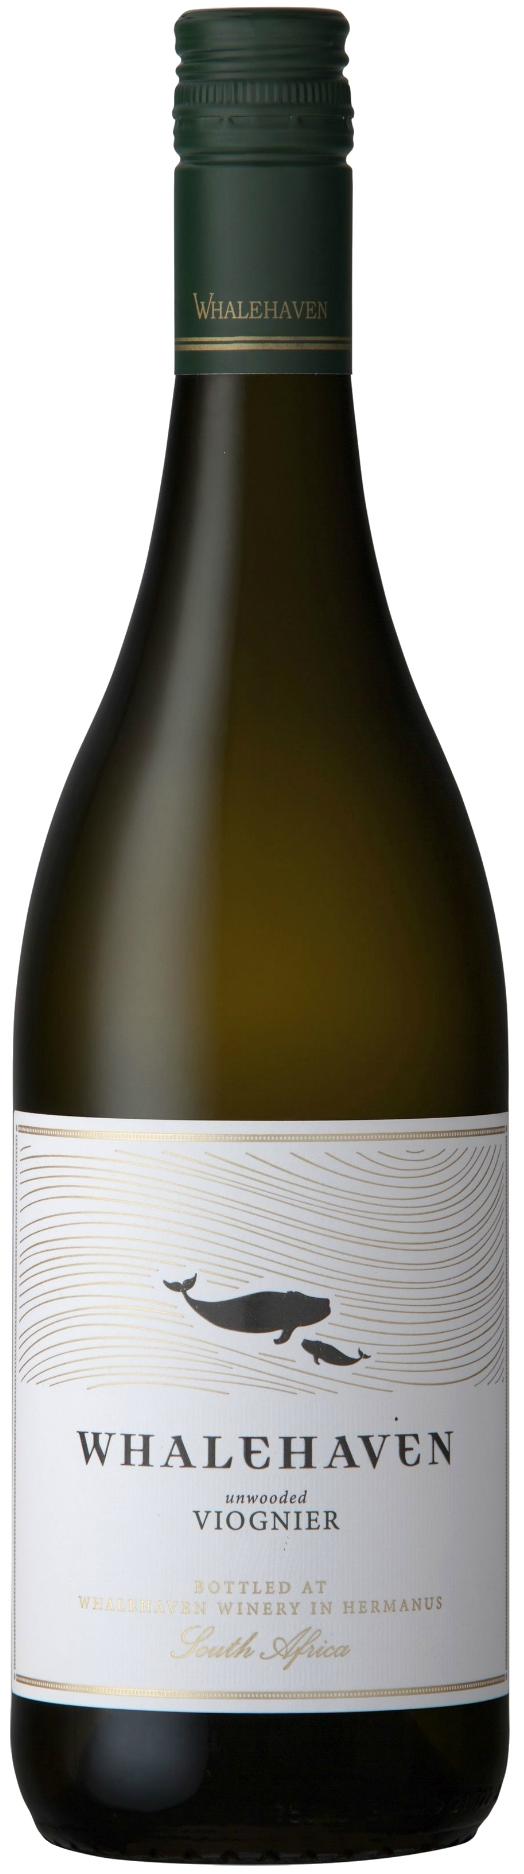 Whalehaven Unwooded Viognier 2020